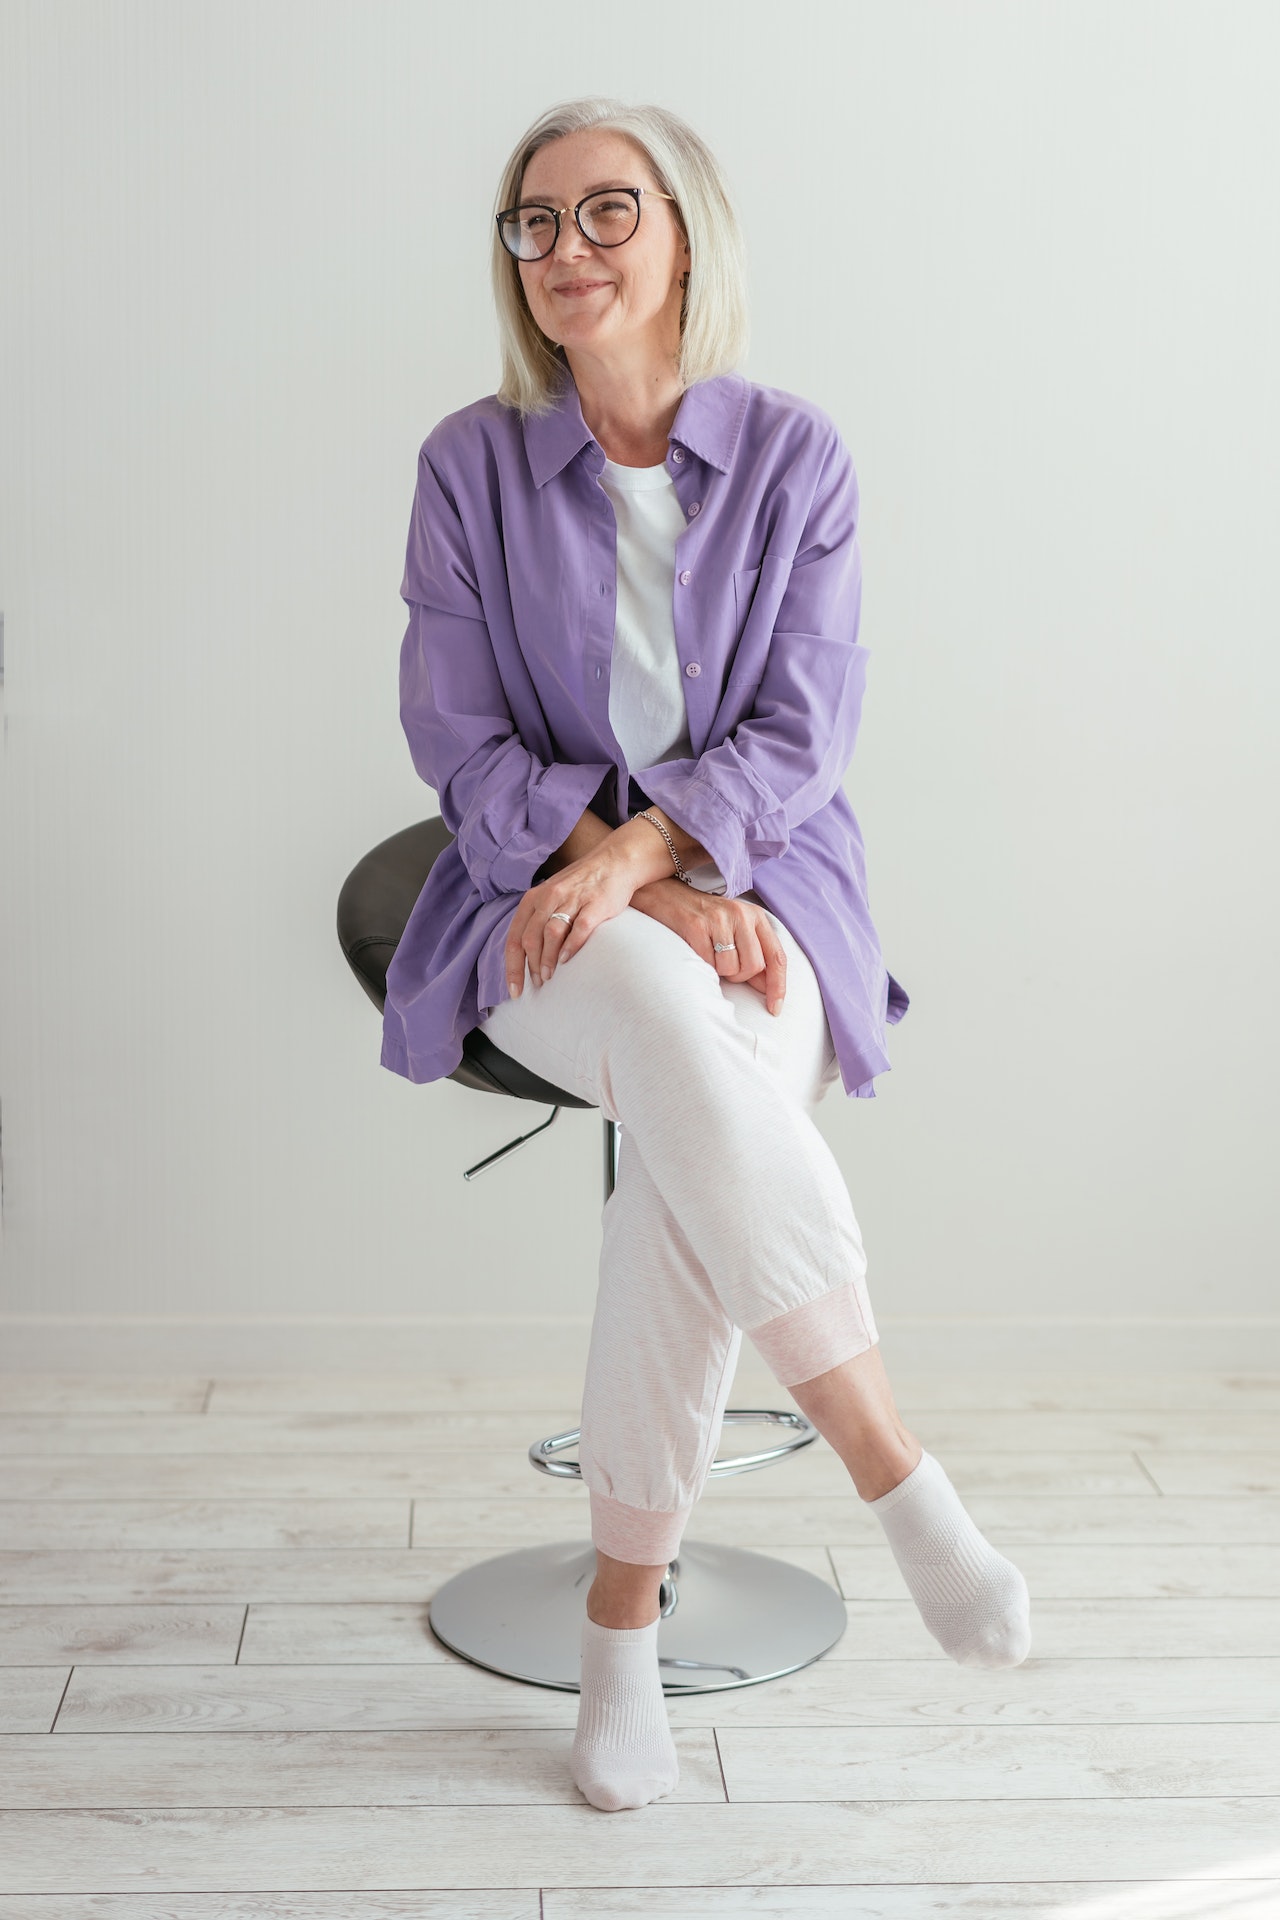 The Comfortable Basics Women Over 50 Wear for Travel  Who What Wear